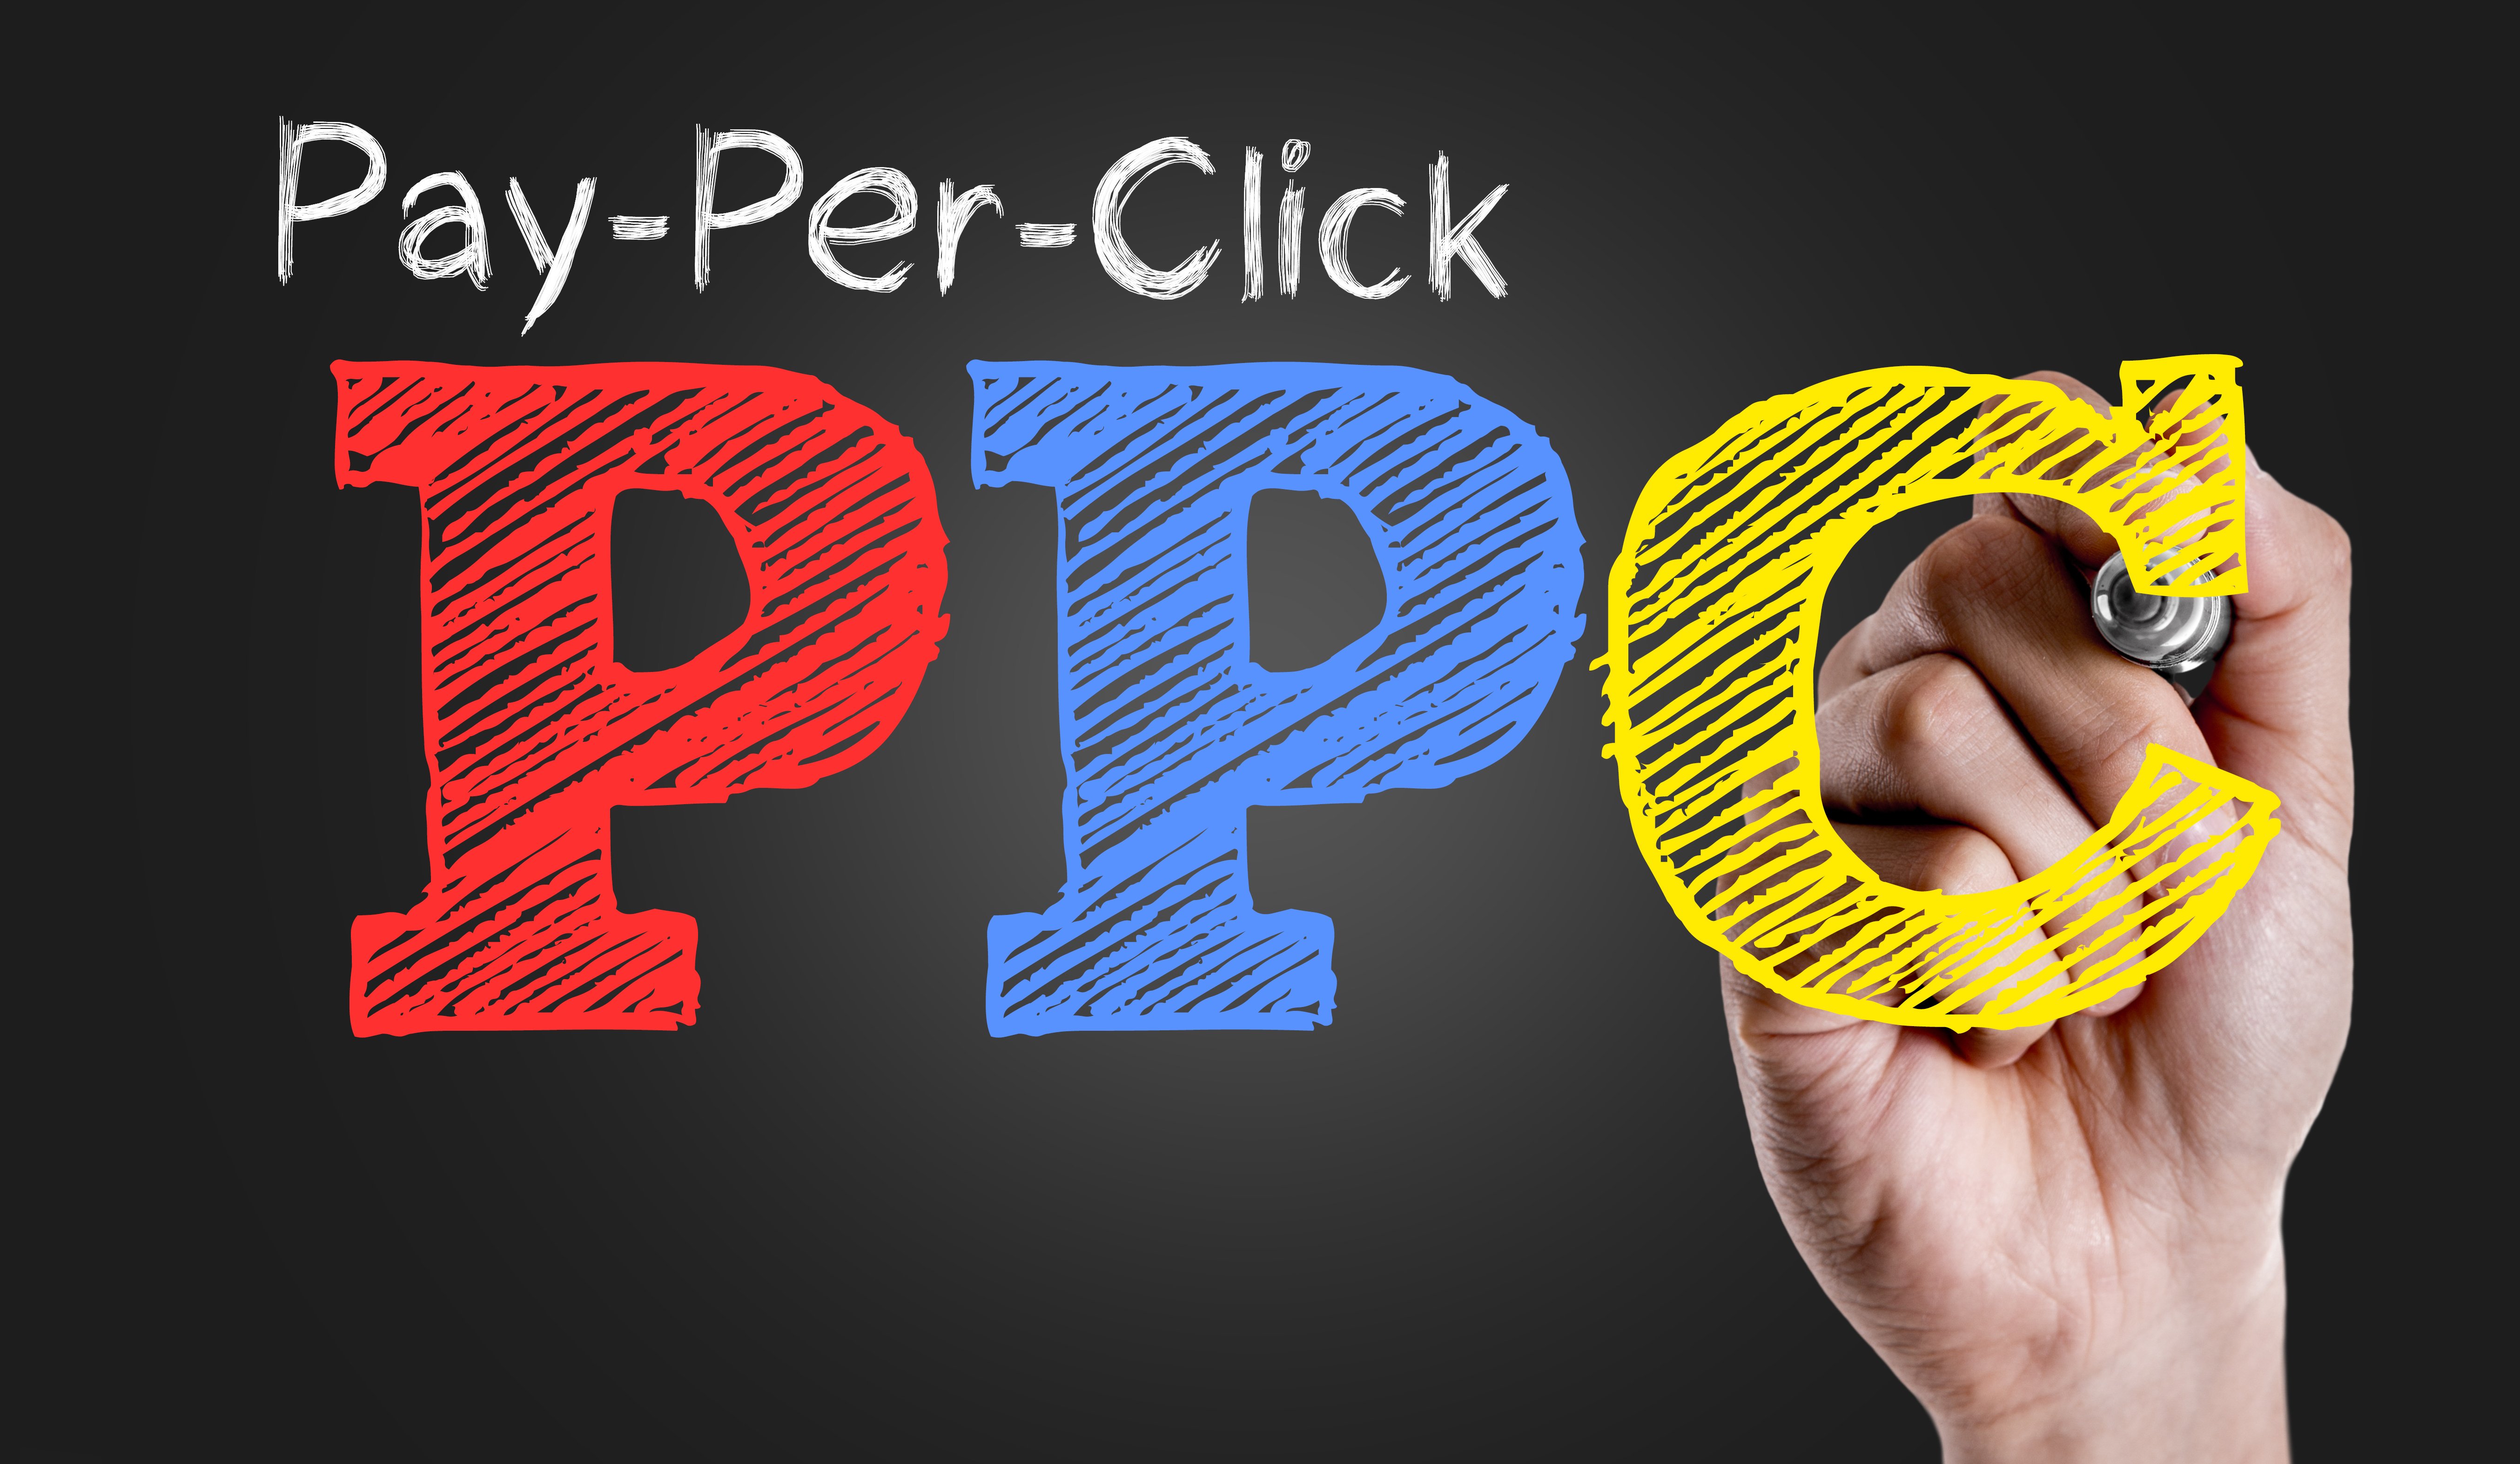 Top 5 Pay-Per-Click Strategies for Tech Firms